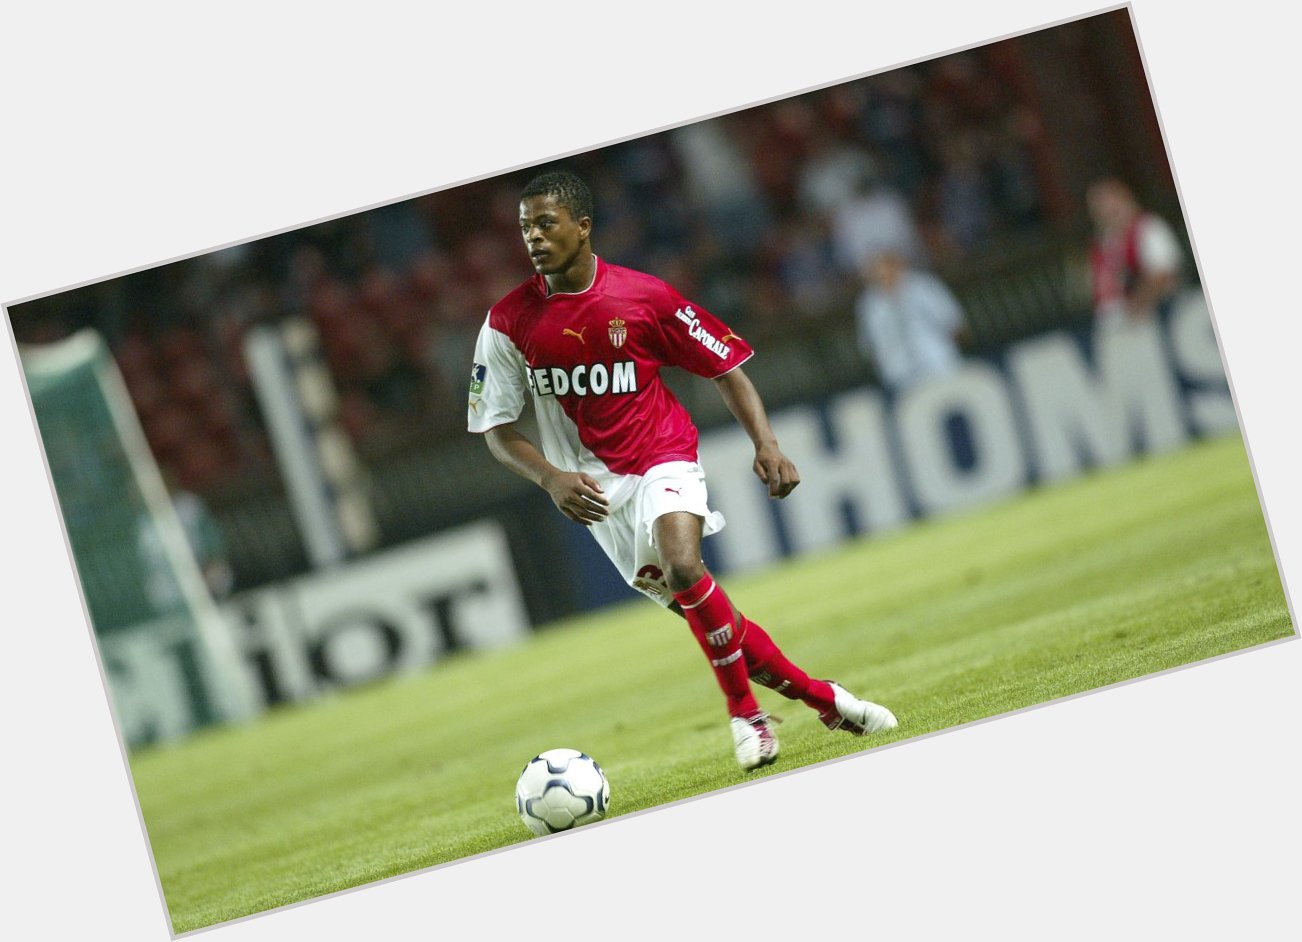 Patrice Evra turns 40 years old today Happy birthday  